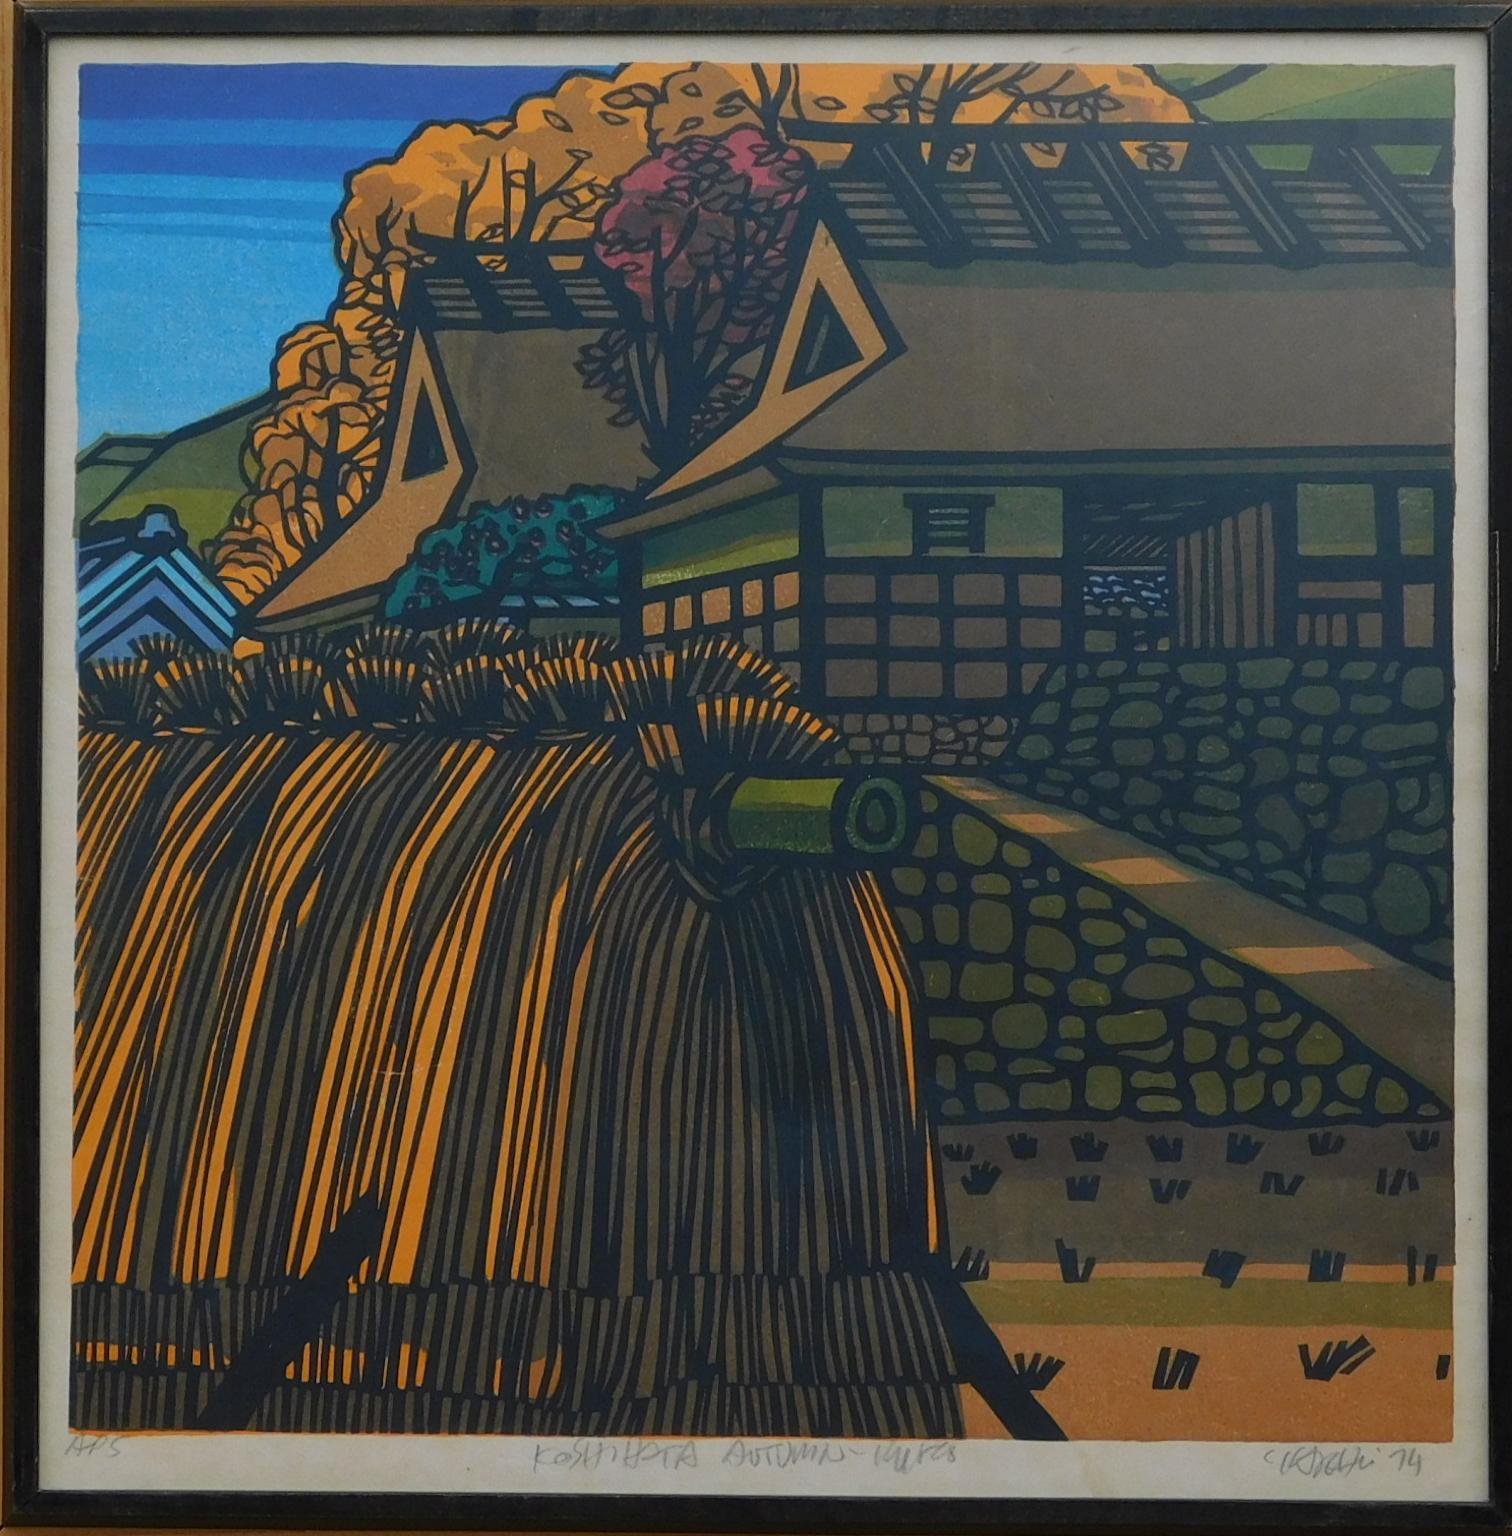 This beautiful, limited edition original color woodblock is by the famous 
Showa Shin Hanga woodblock master Clifton Karhu (1927-2007).
It bears the original frame and has a label on the back from a Tokyo gallery.
The work is a beautiful